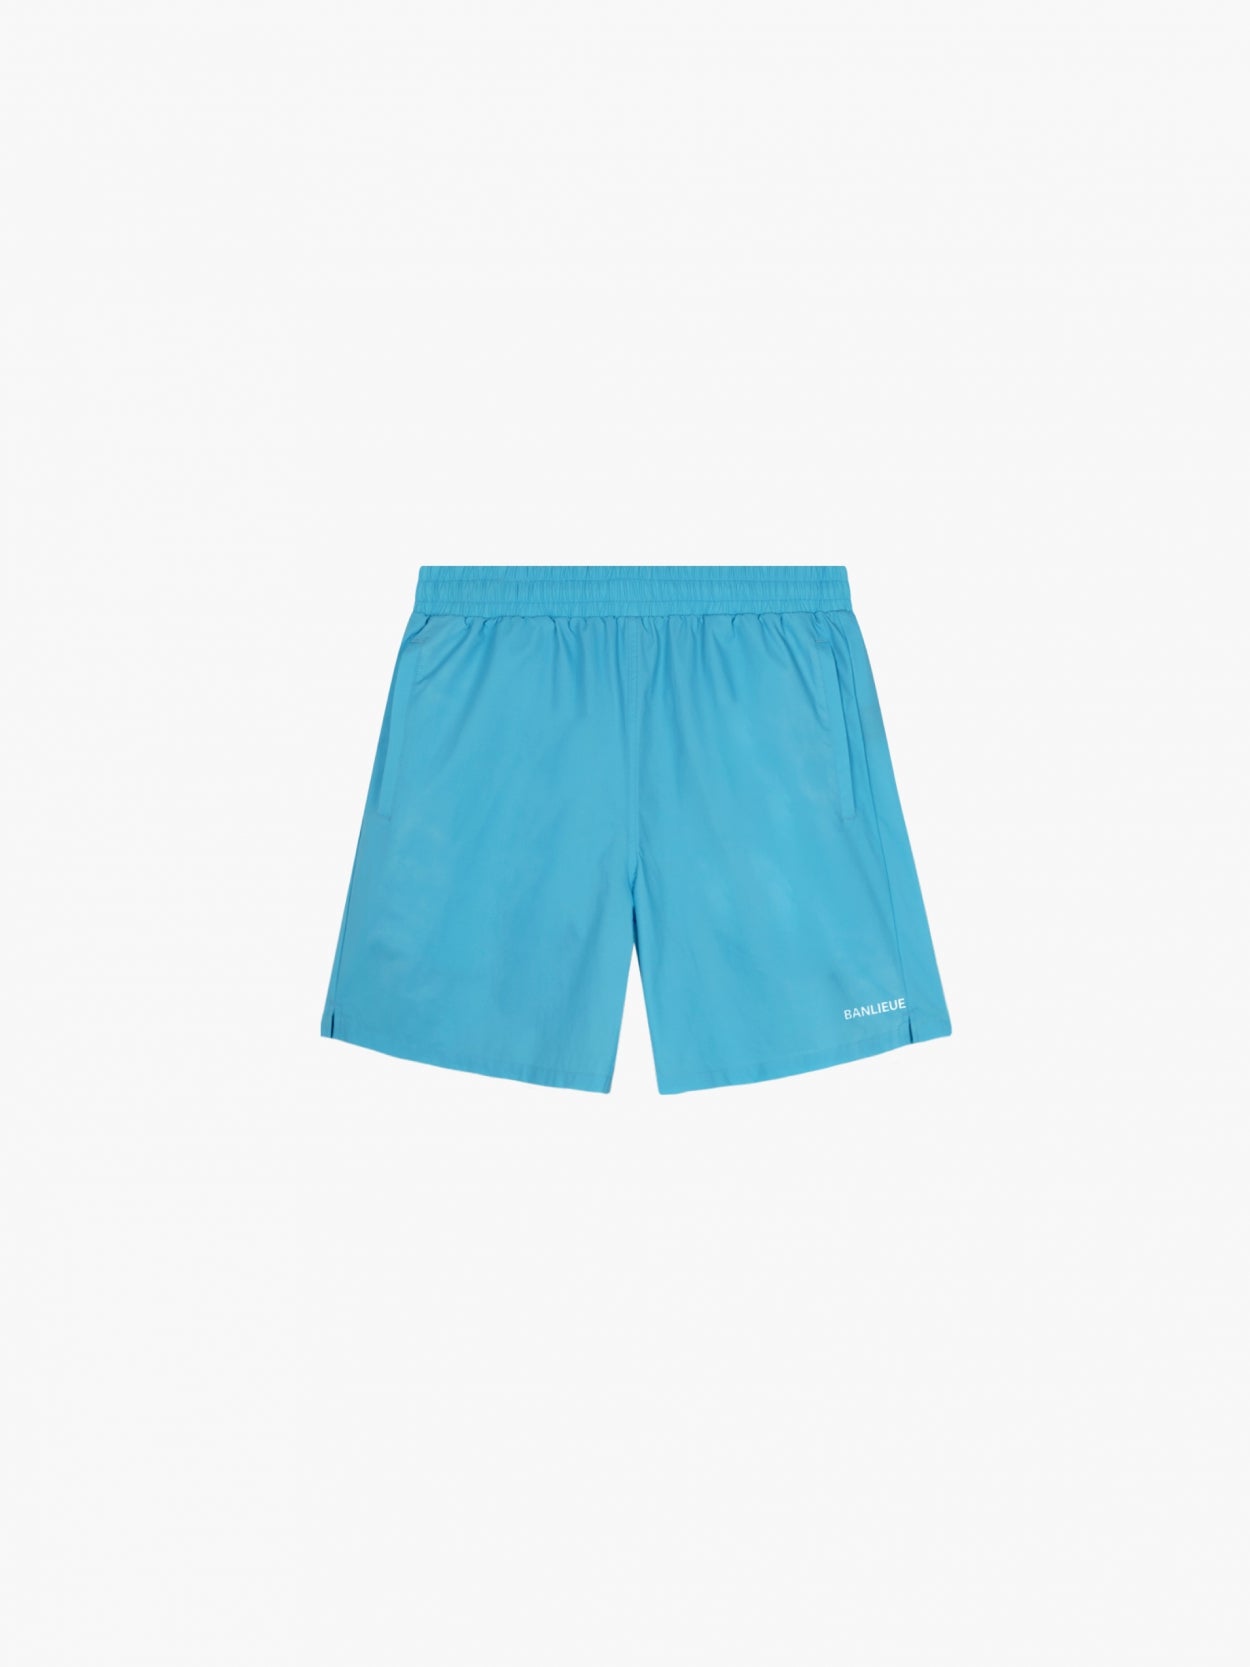 SCRIPT SWIMSHORTS | ETHEREAL BLUE